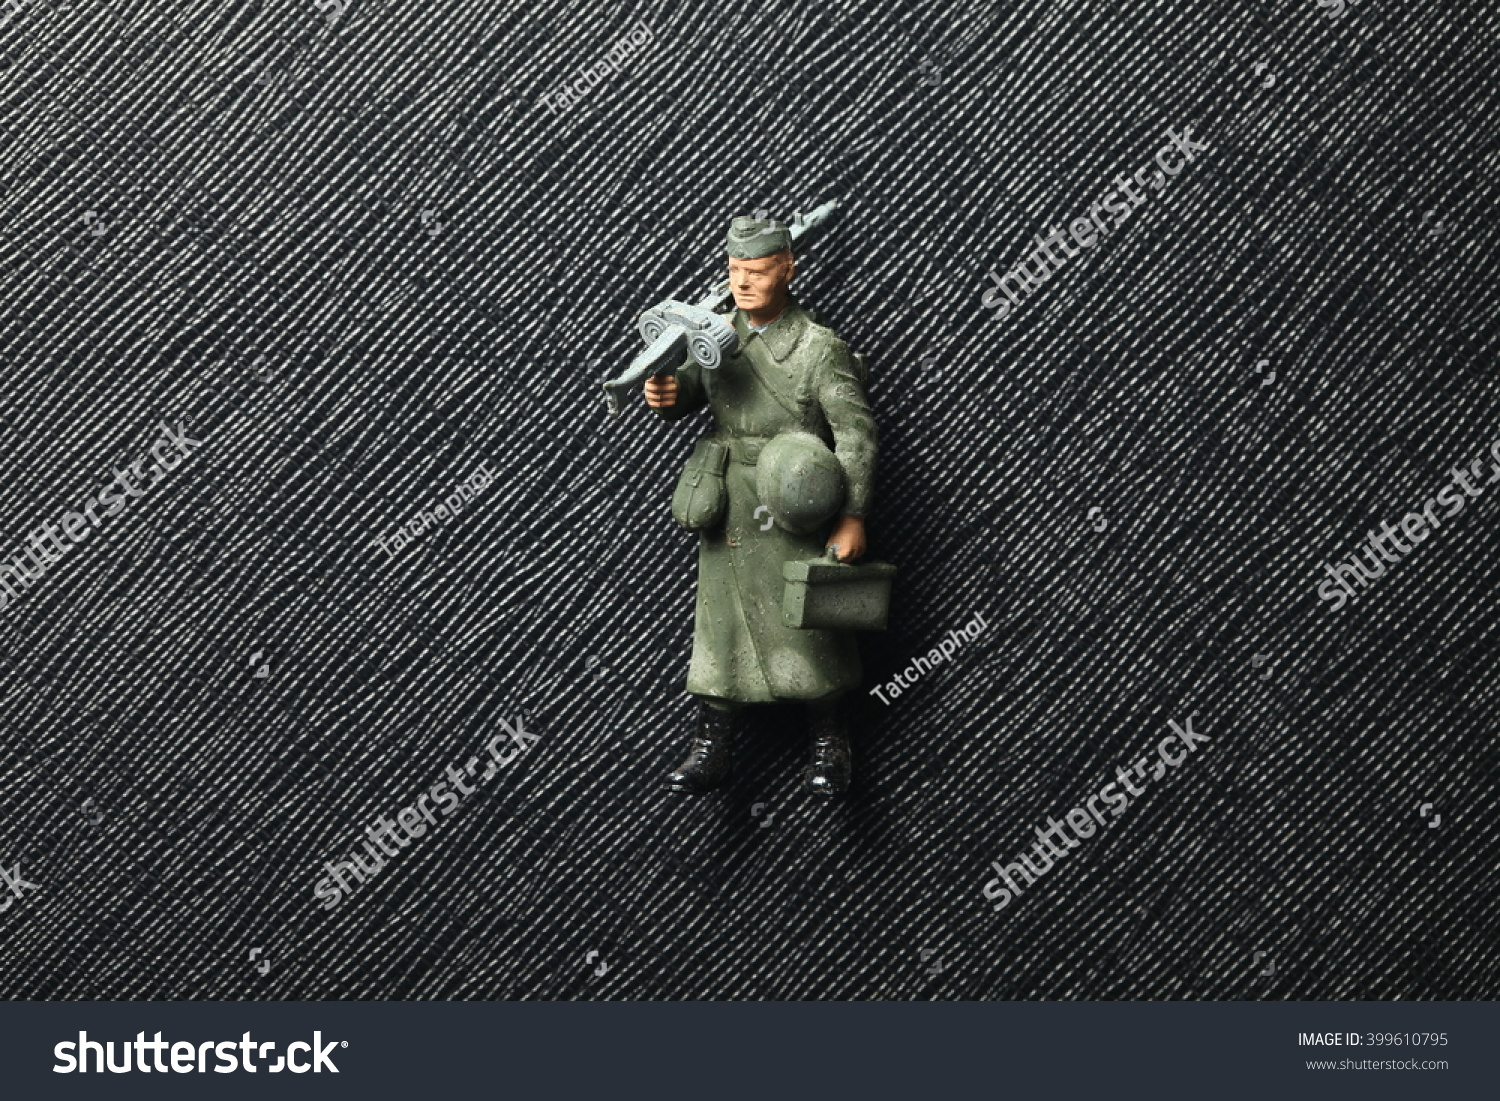 miniature soldiers hobby